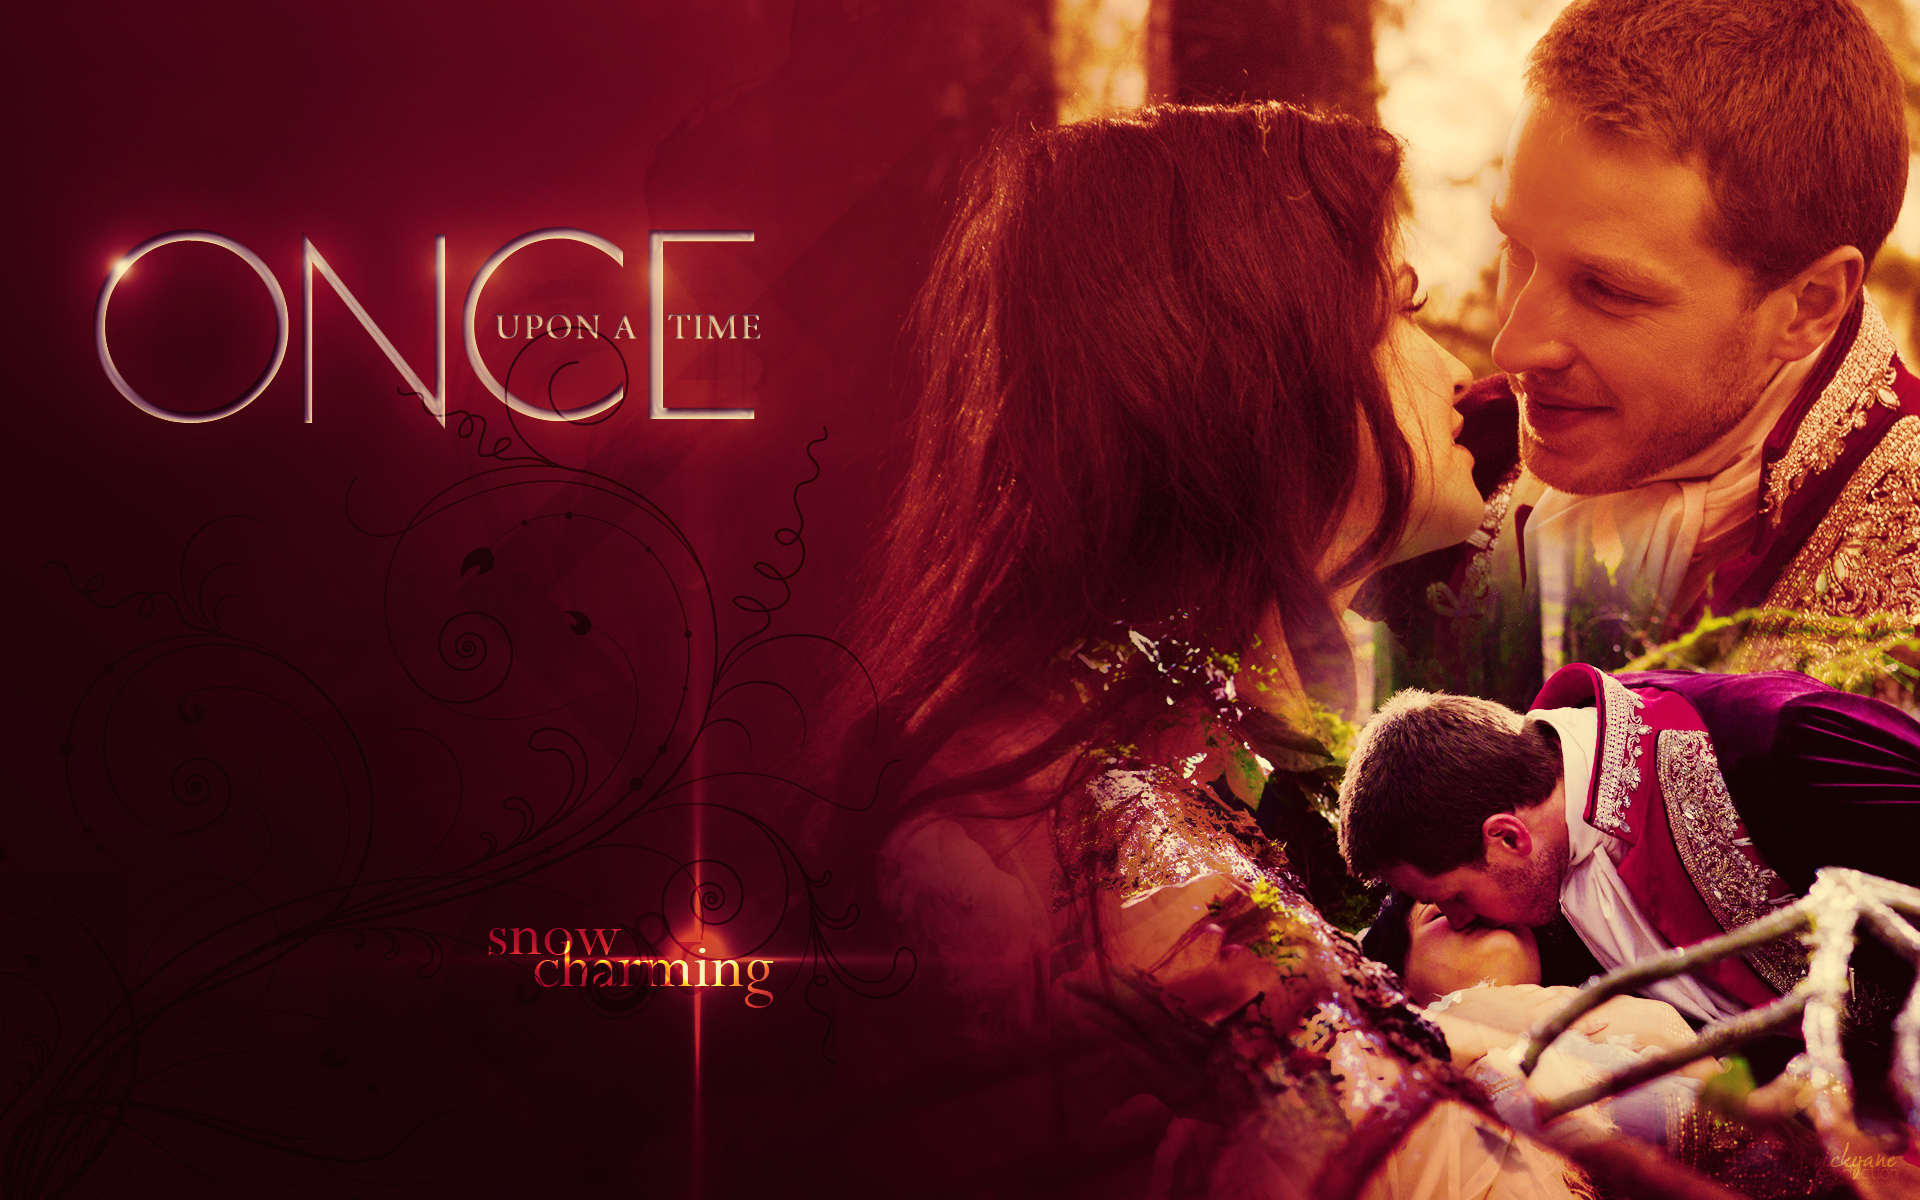 Once Upon A Time Image Snow Charming HD Wallpaper And